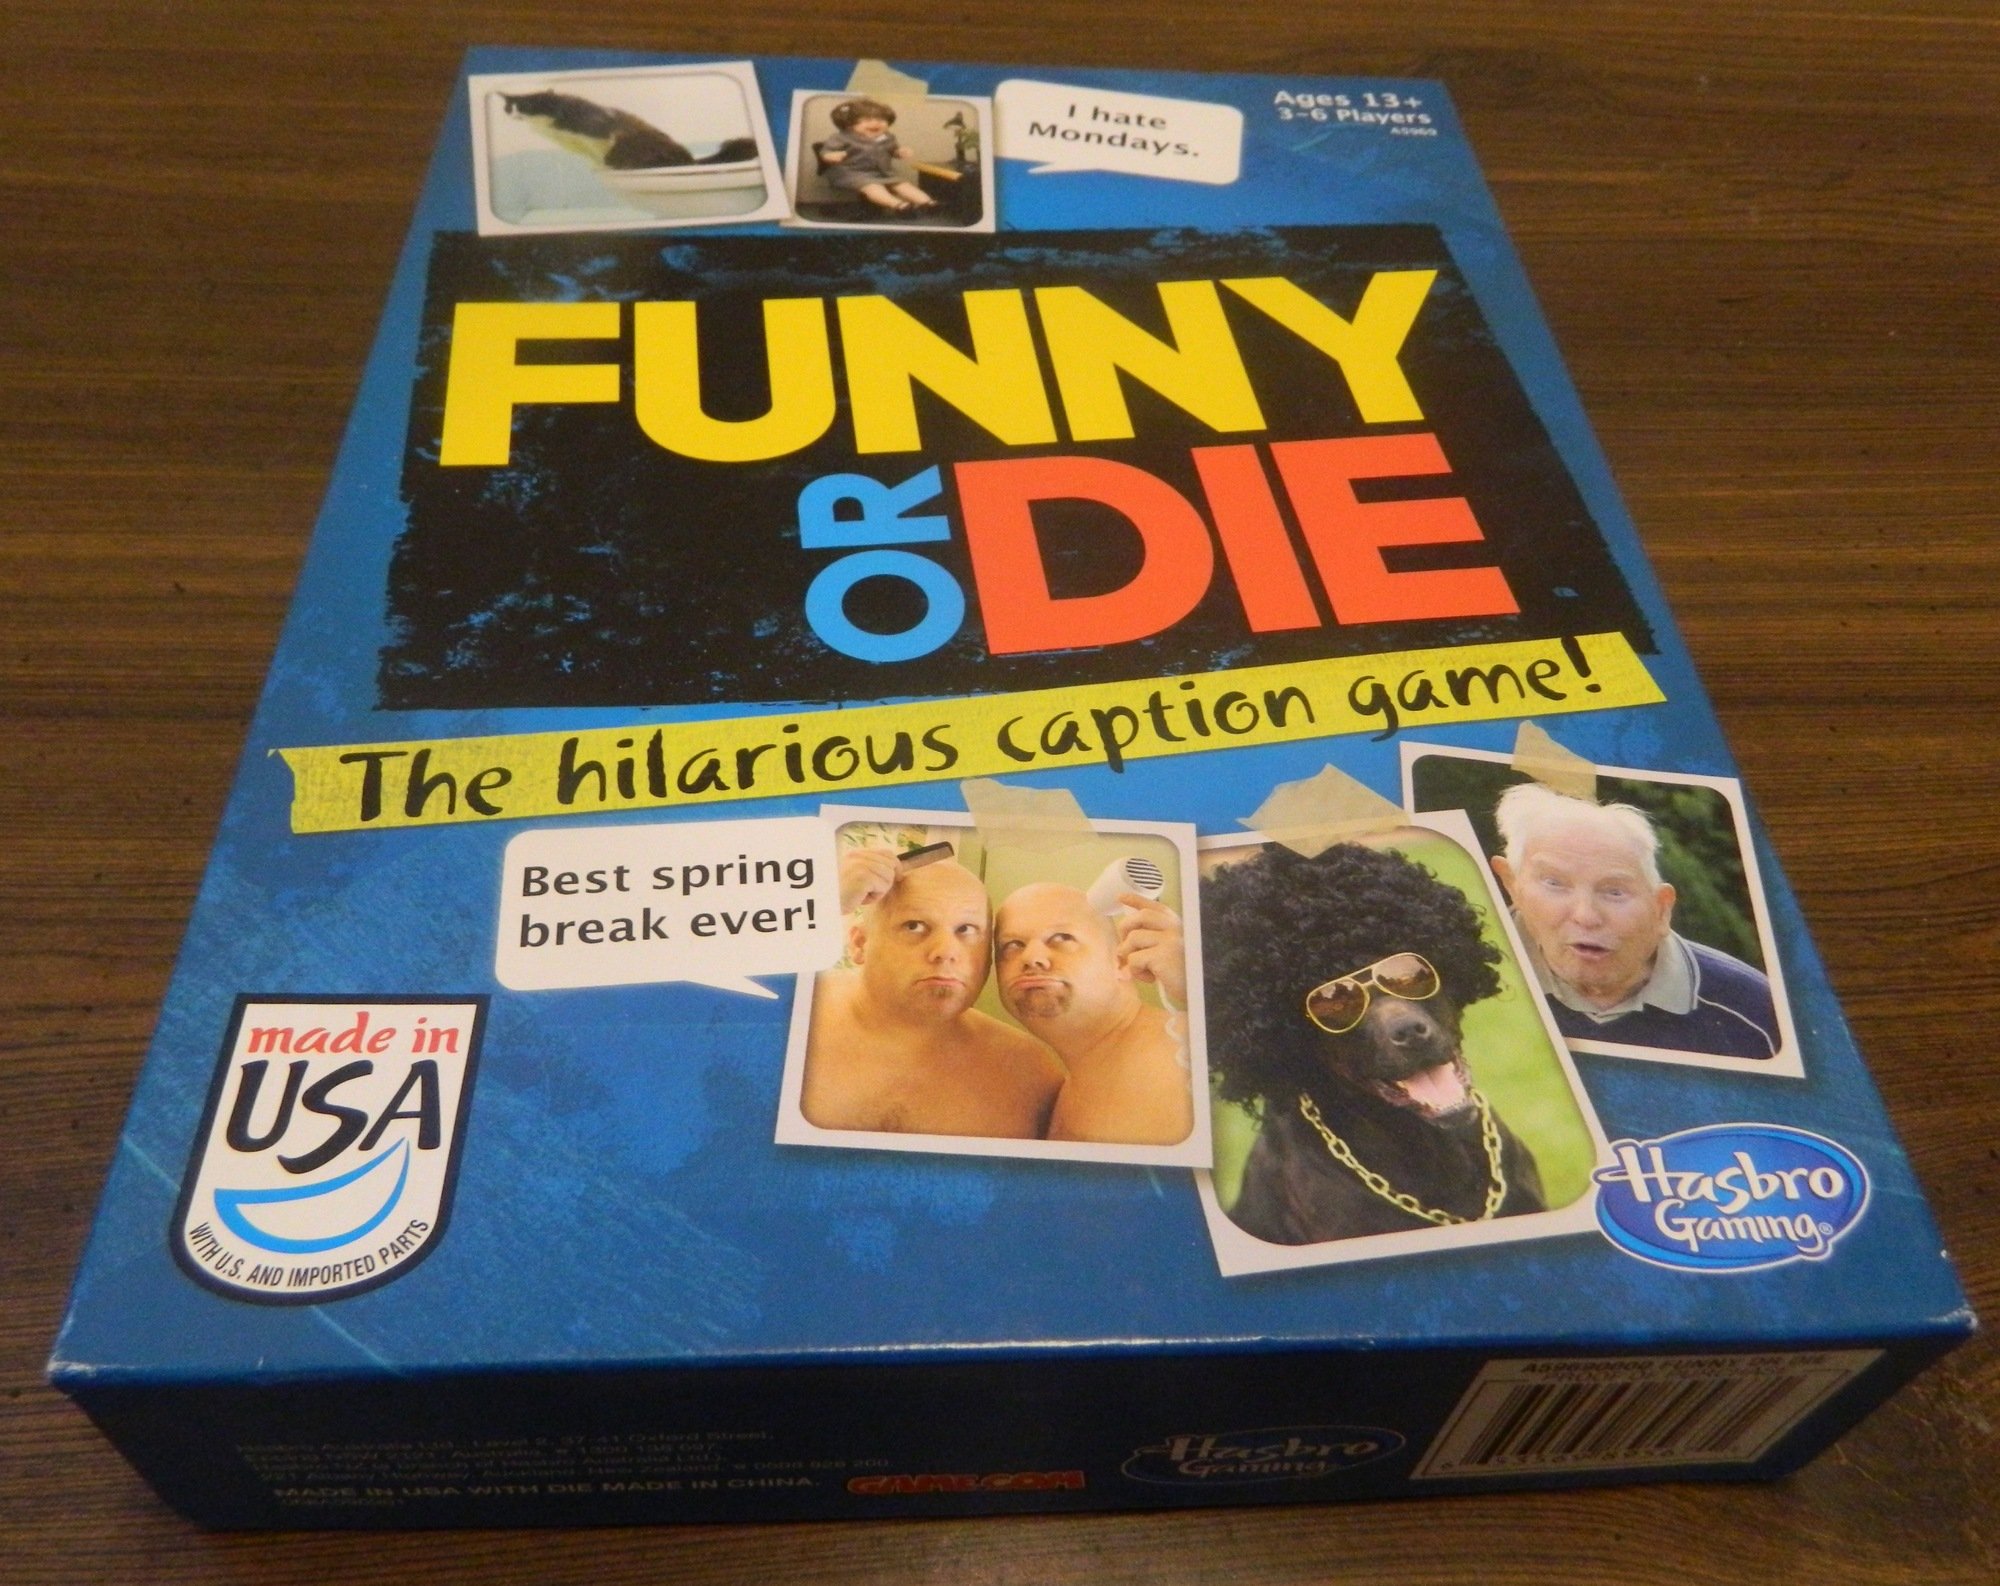 Box for Funny or Die